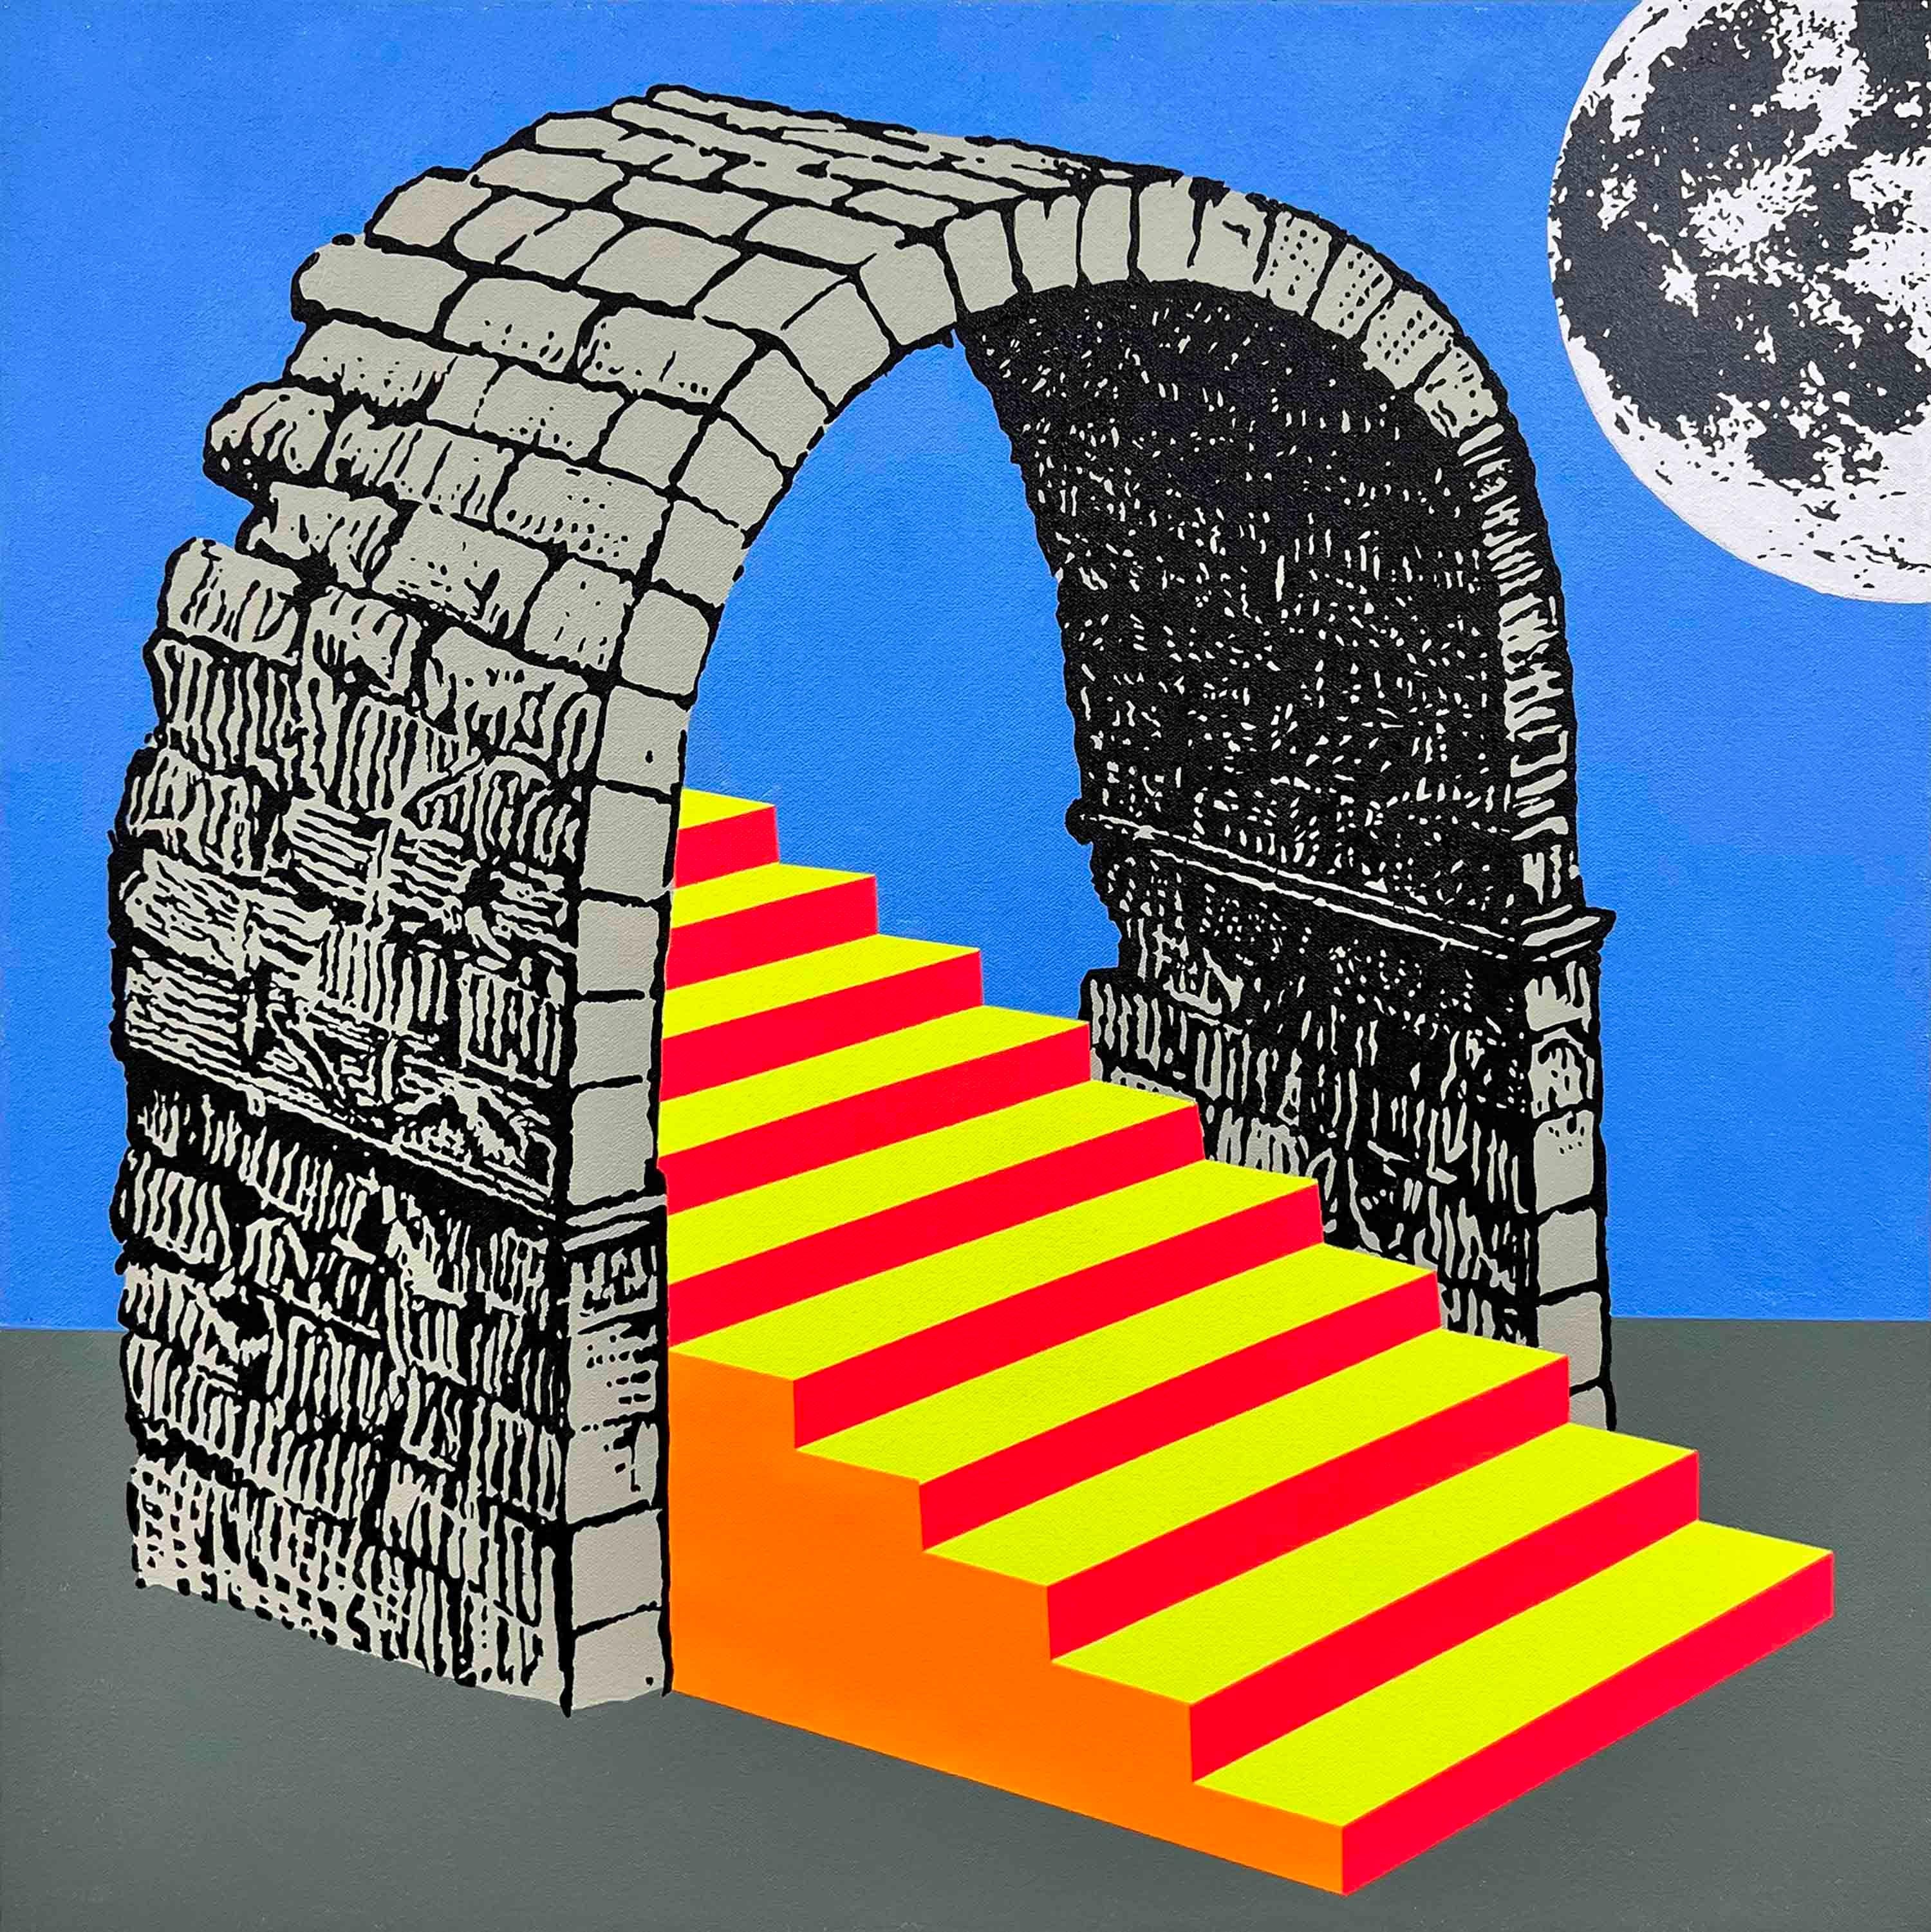 Chris Cascio Abstract Painting - "Untitled (Barrel Vault and Moon)" Contemporary Abstract Staircase Landscape